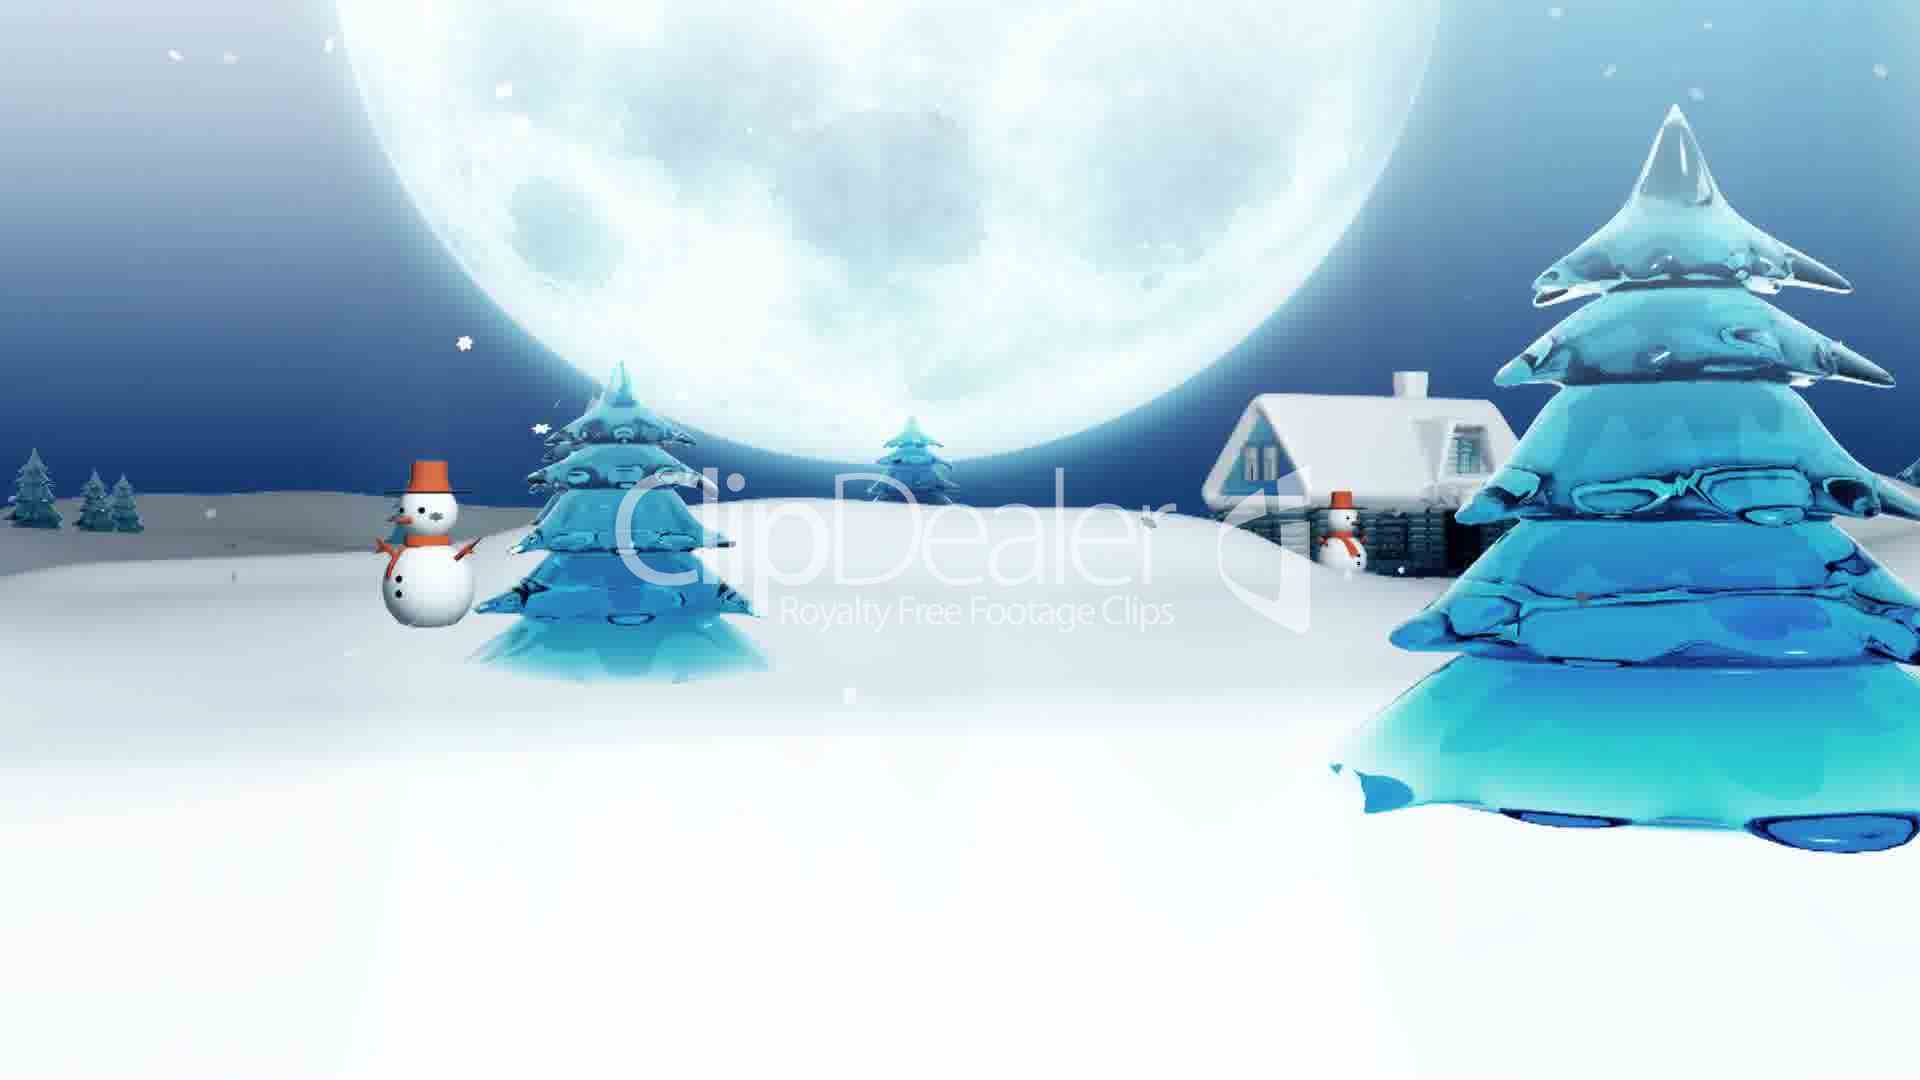 Christmas Eve and Peaceful Town: Royalty-free video and stock footage